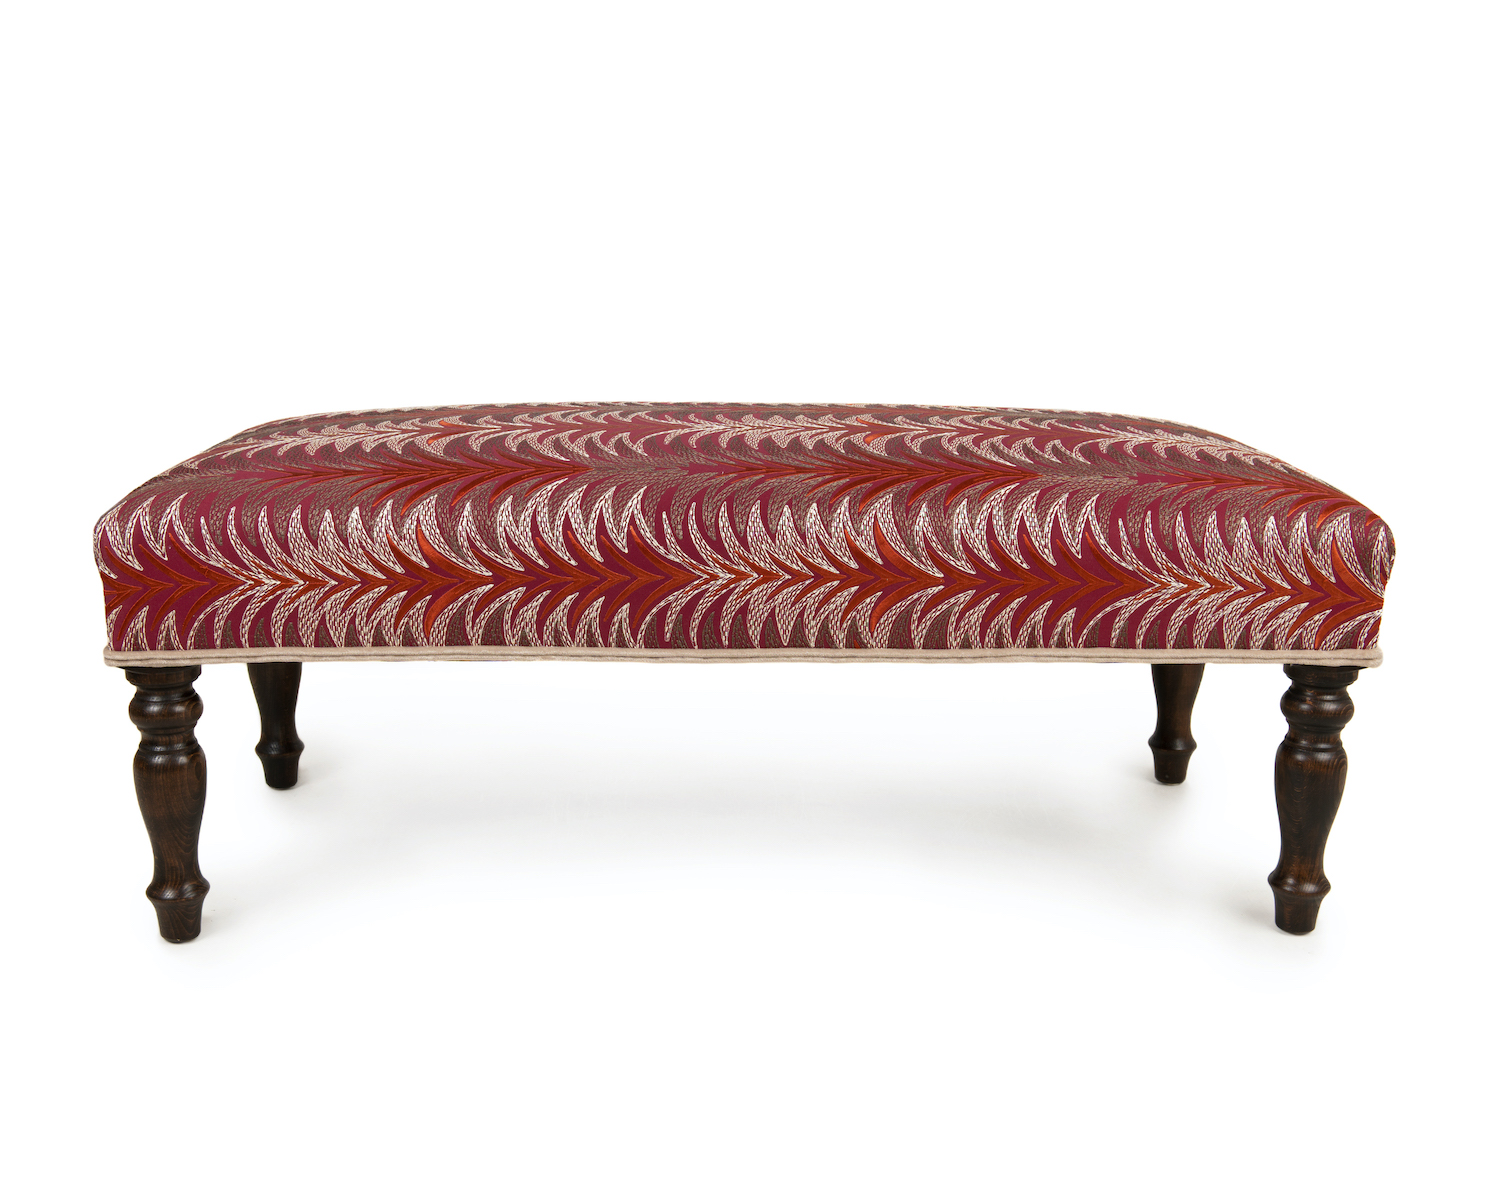 Striking Roll Top Footstool with Double Piping and Turned Legs